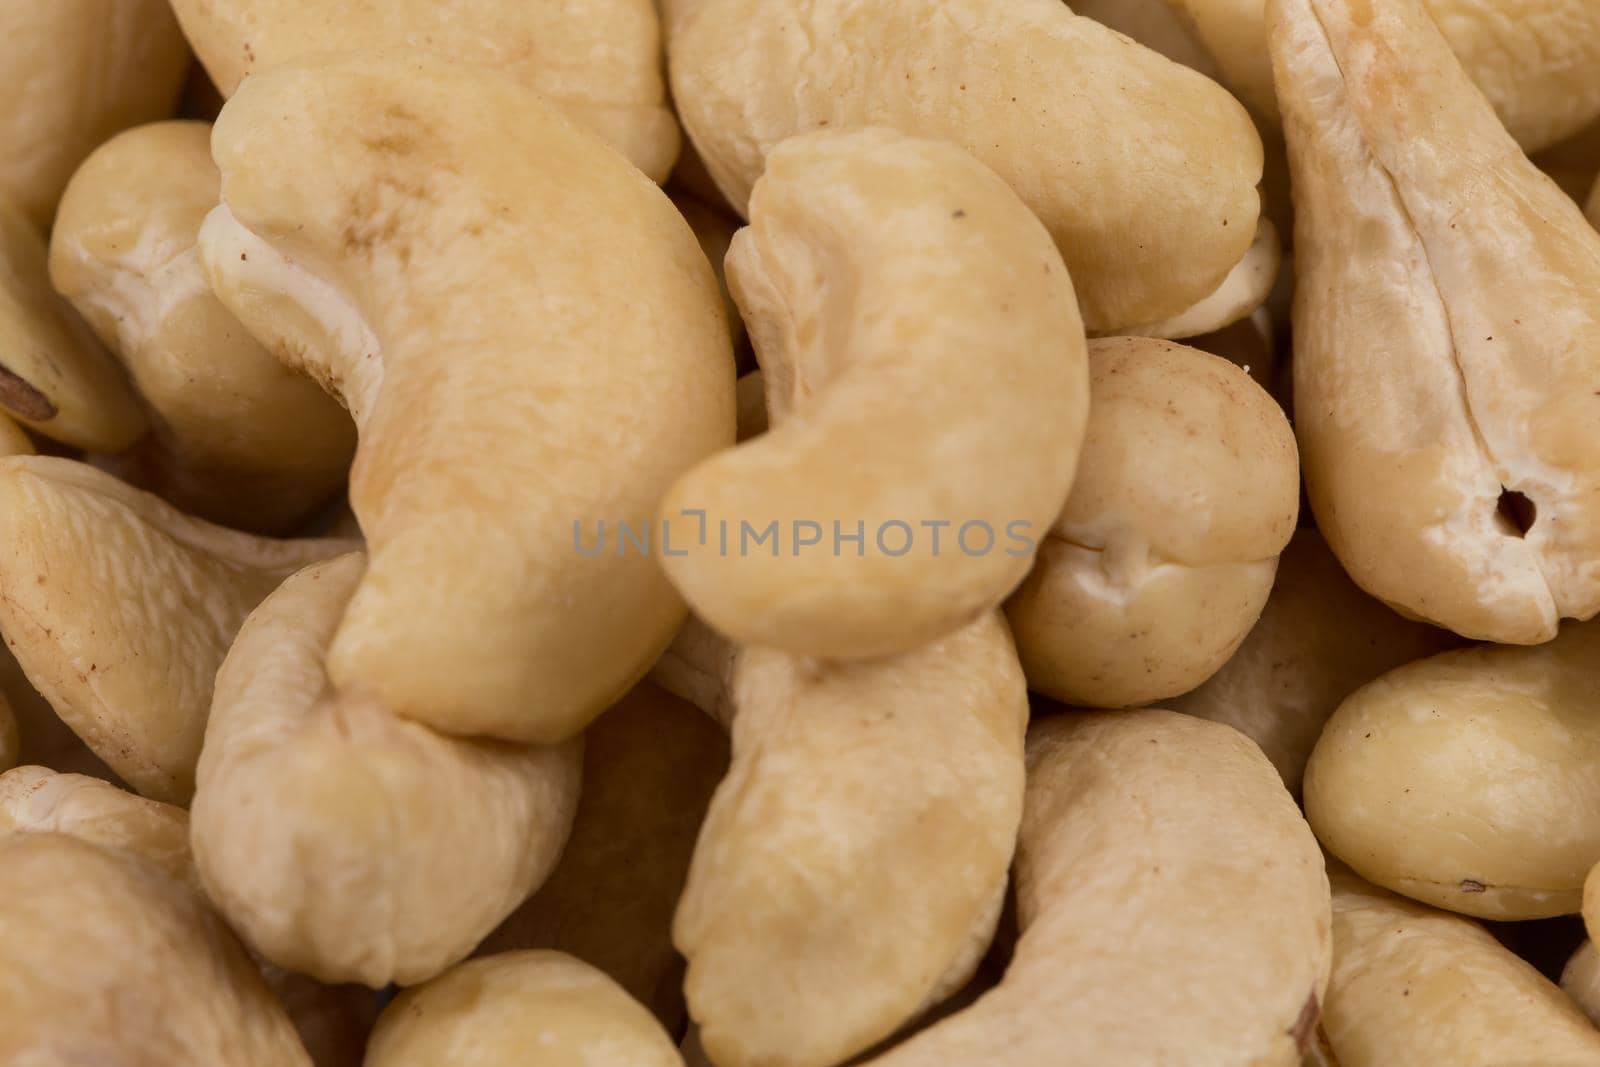 Cashew nuts by RTsubin